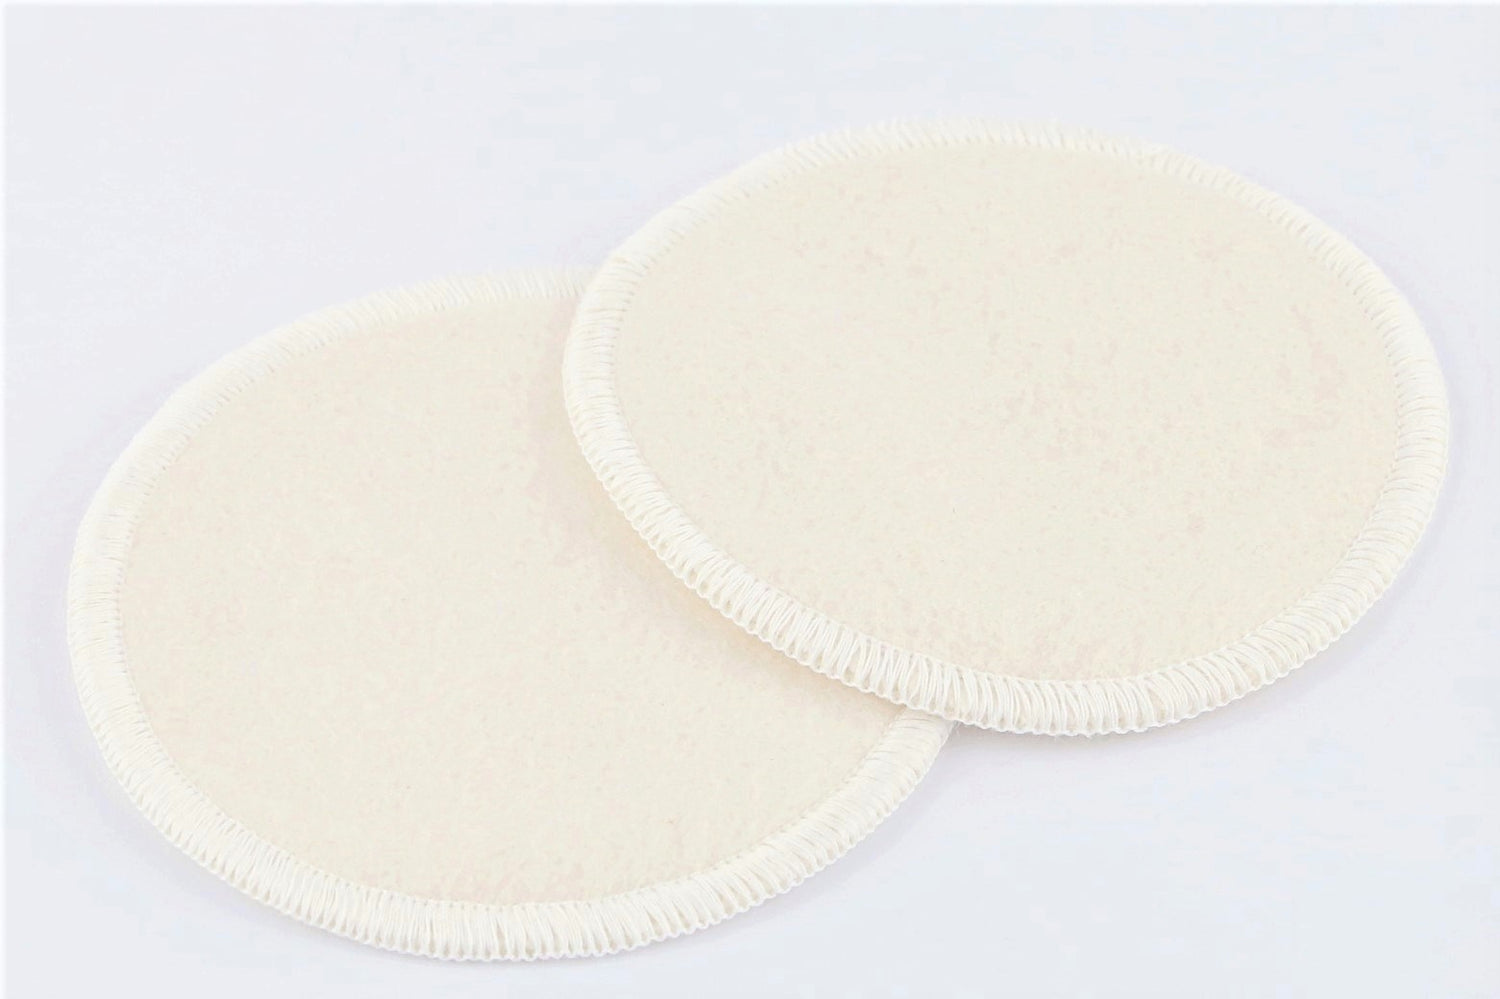 Sustainable 100% Organic Natural Cotton Fiber Cosmetic Pads